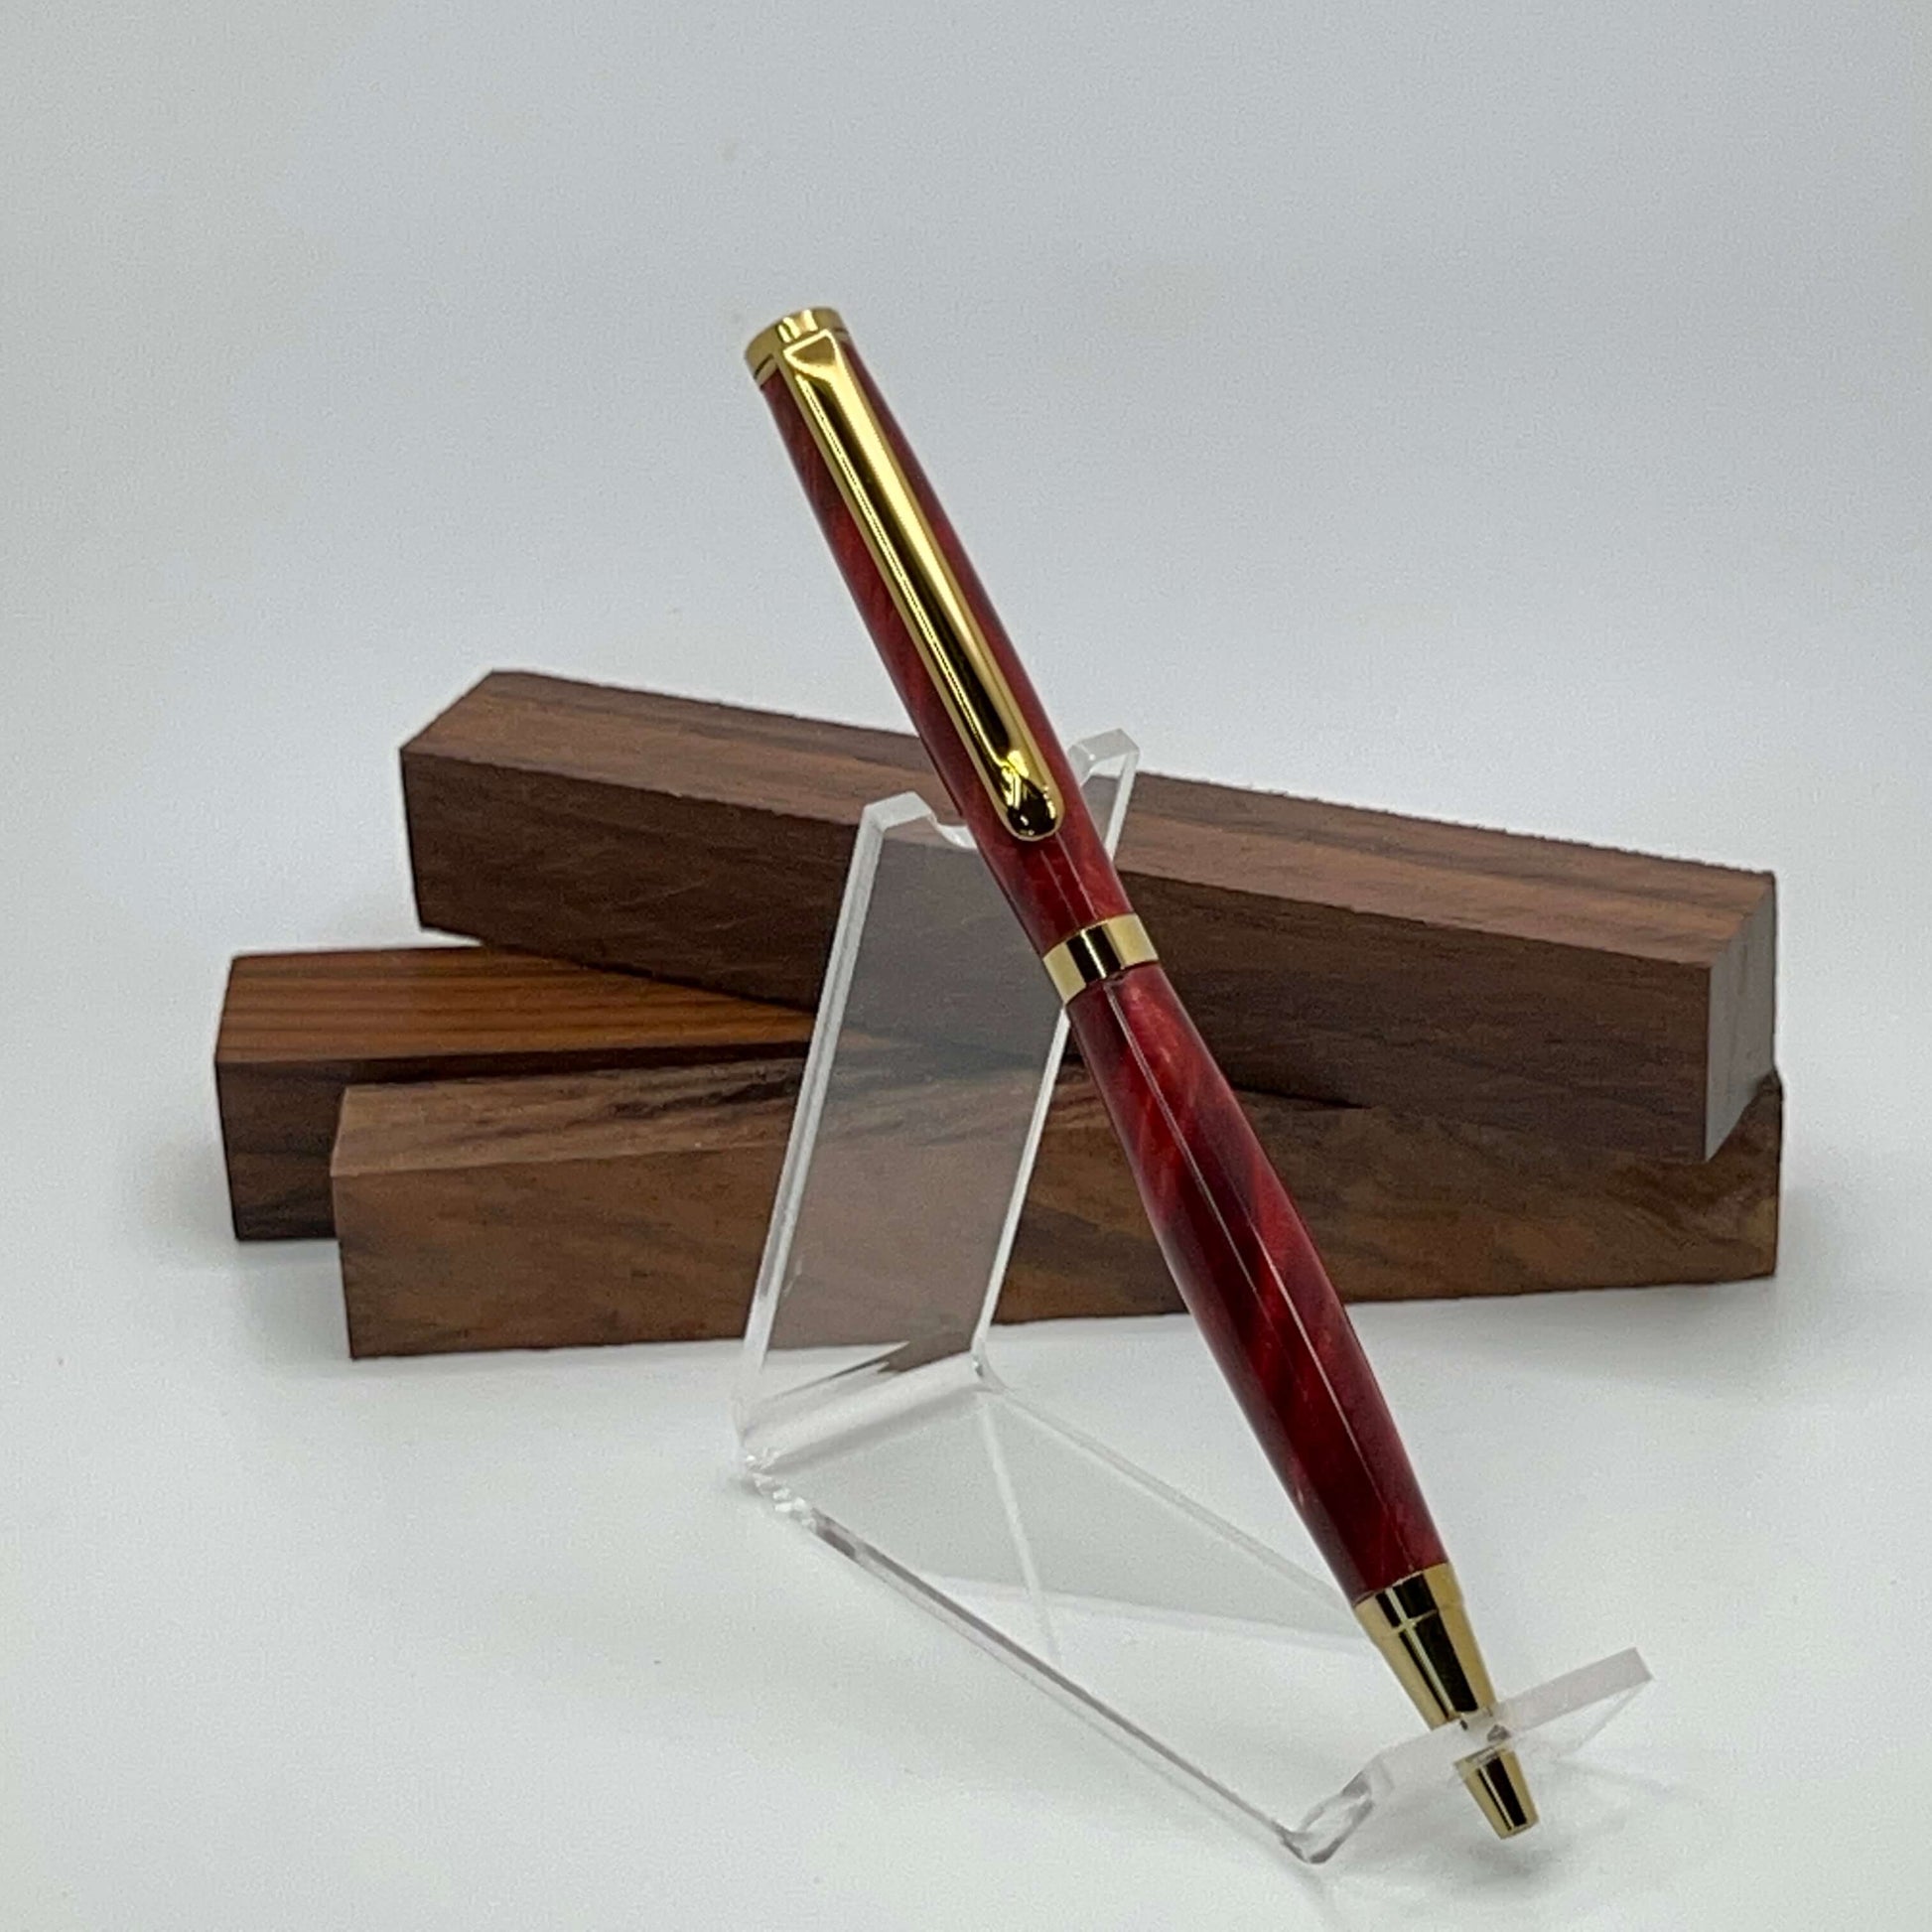 Handcrafted pen with Box Elder Burl wood dyed red and gold titanium hardware